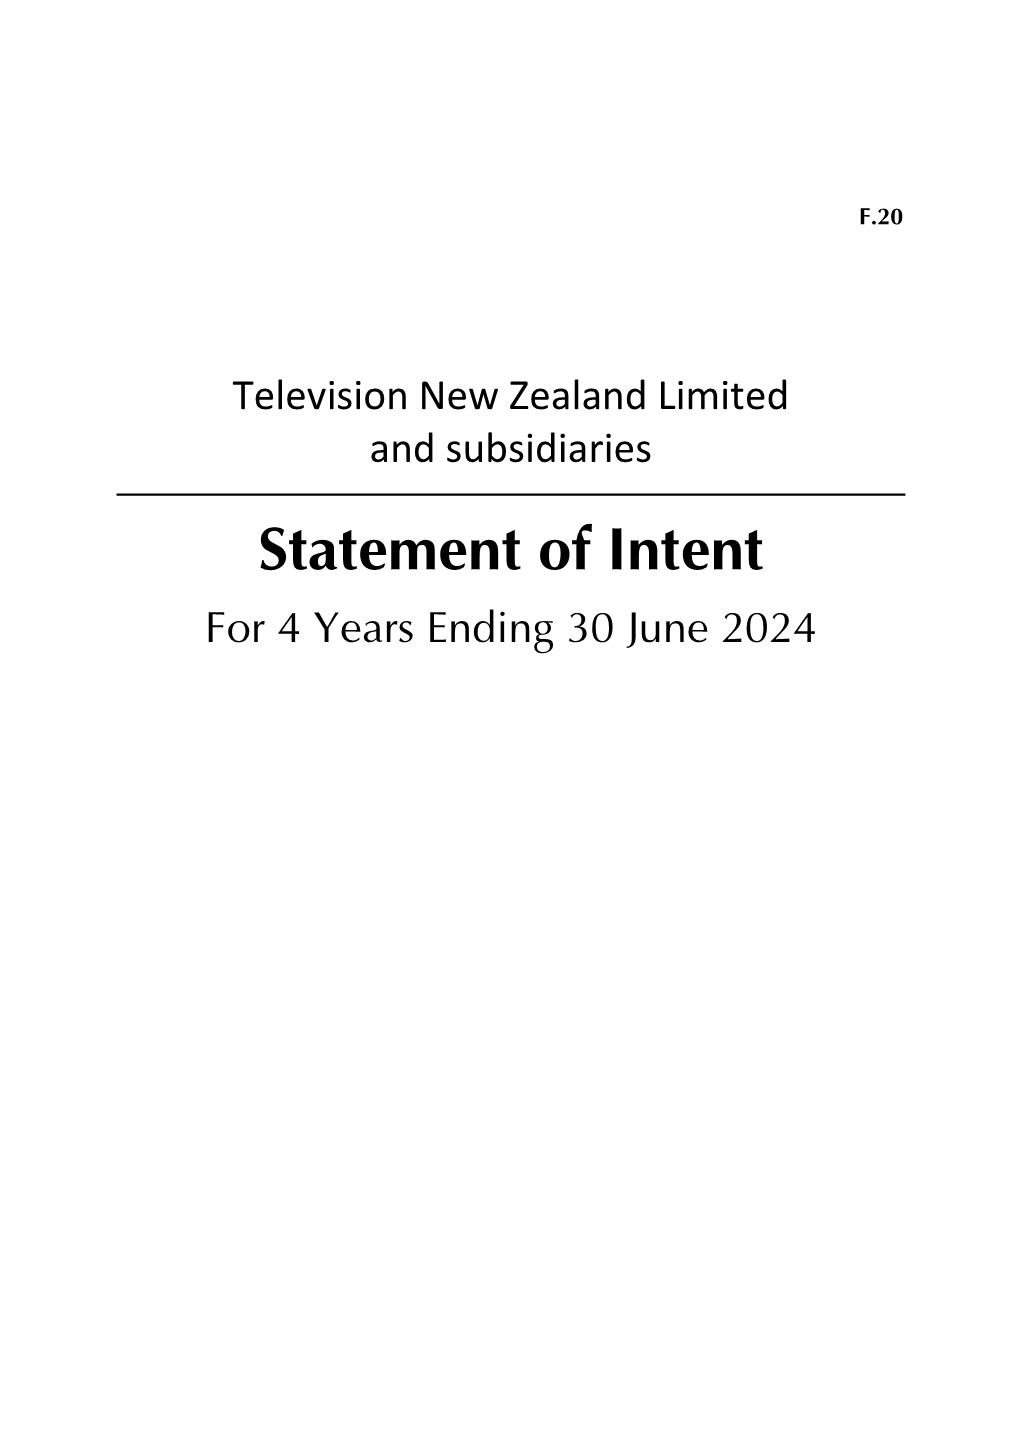 Statement of Intent for 4 Years Ending 30 June 2024